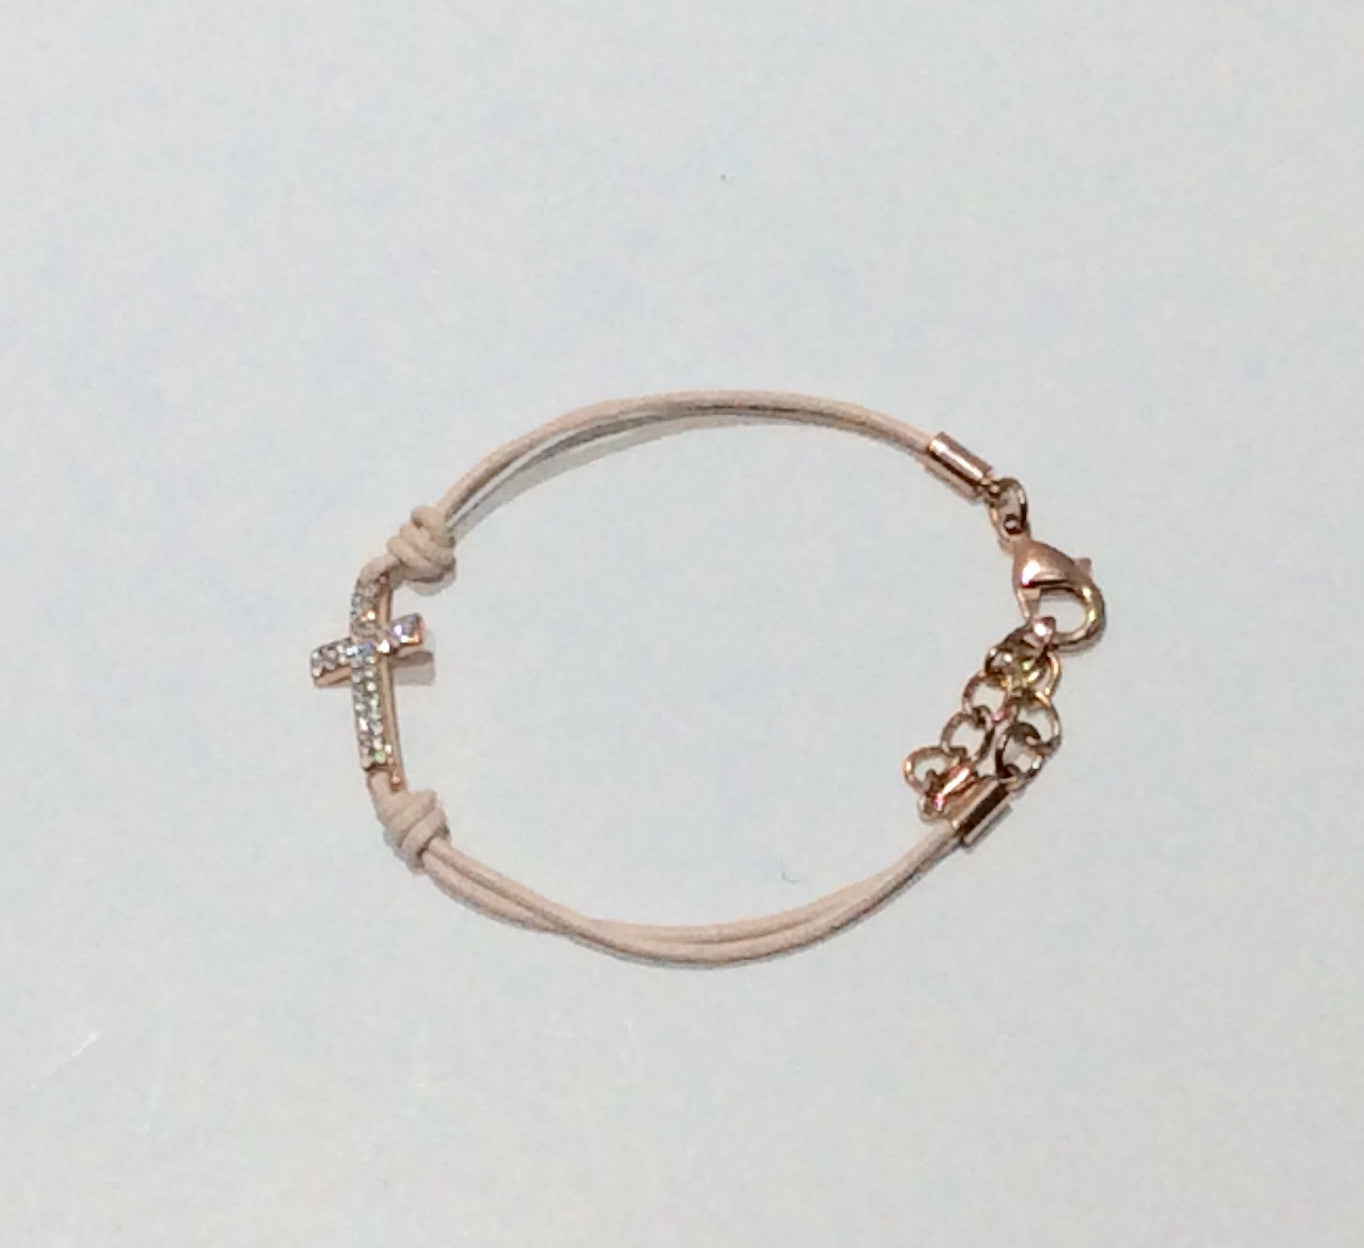 Bracelet-Double strand pale pink leather cord with crystal cross